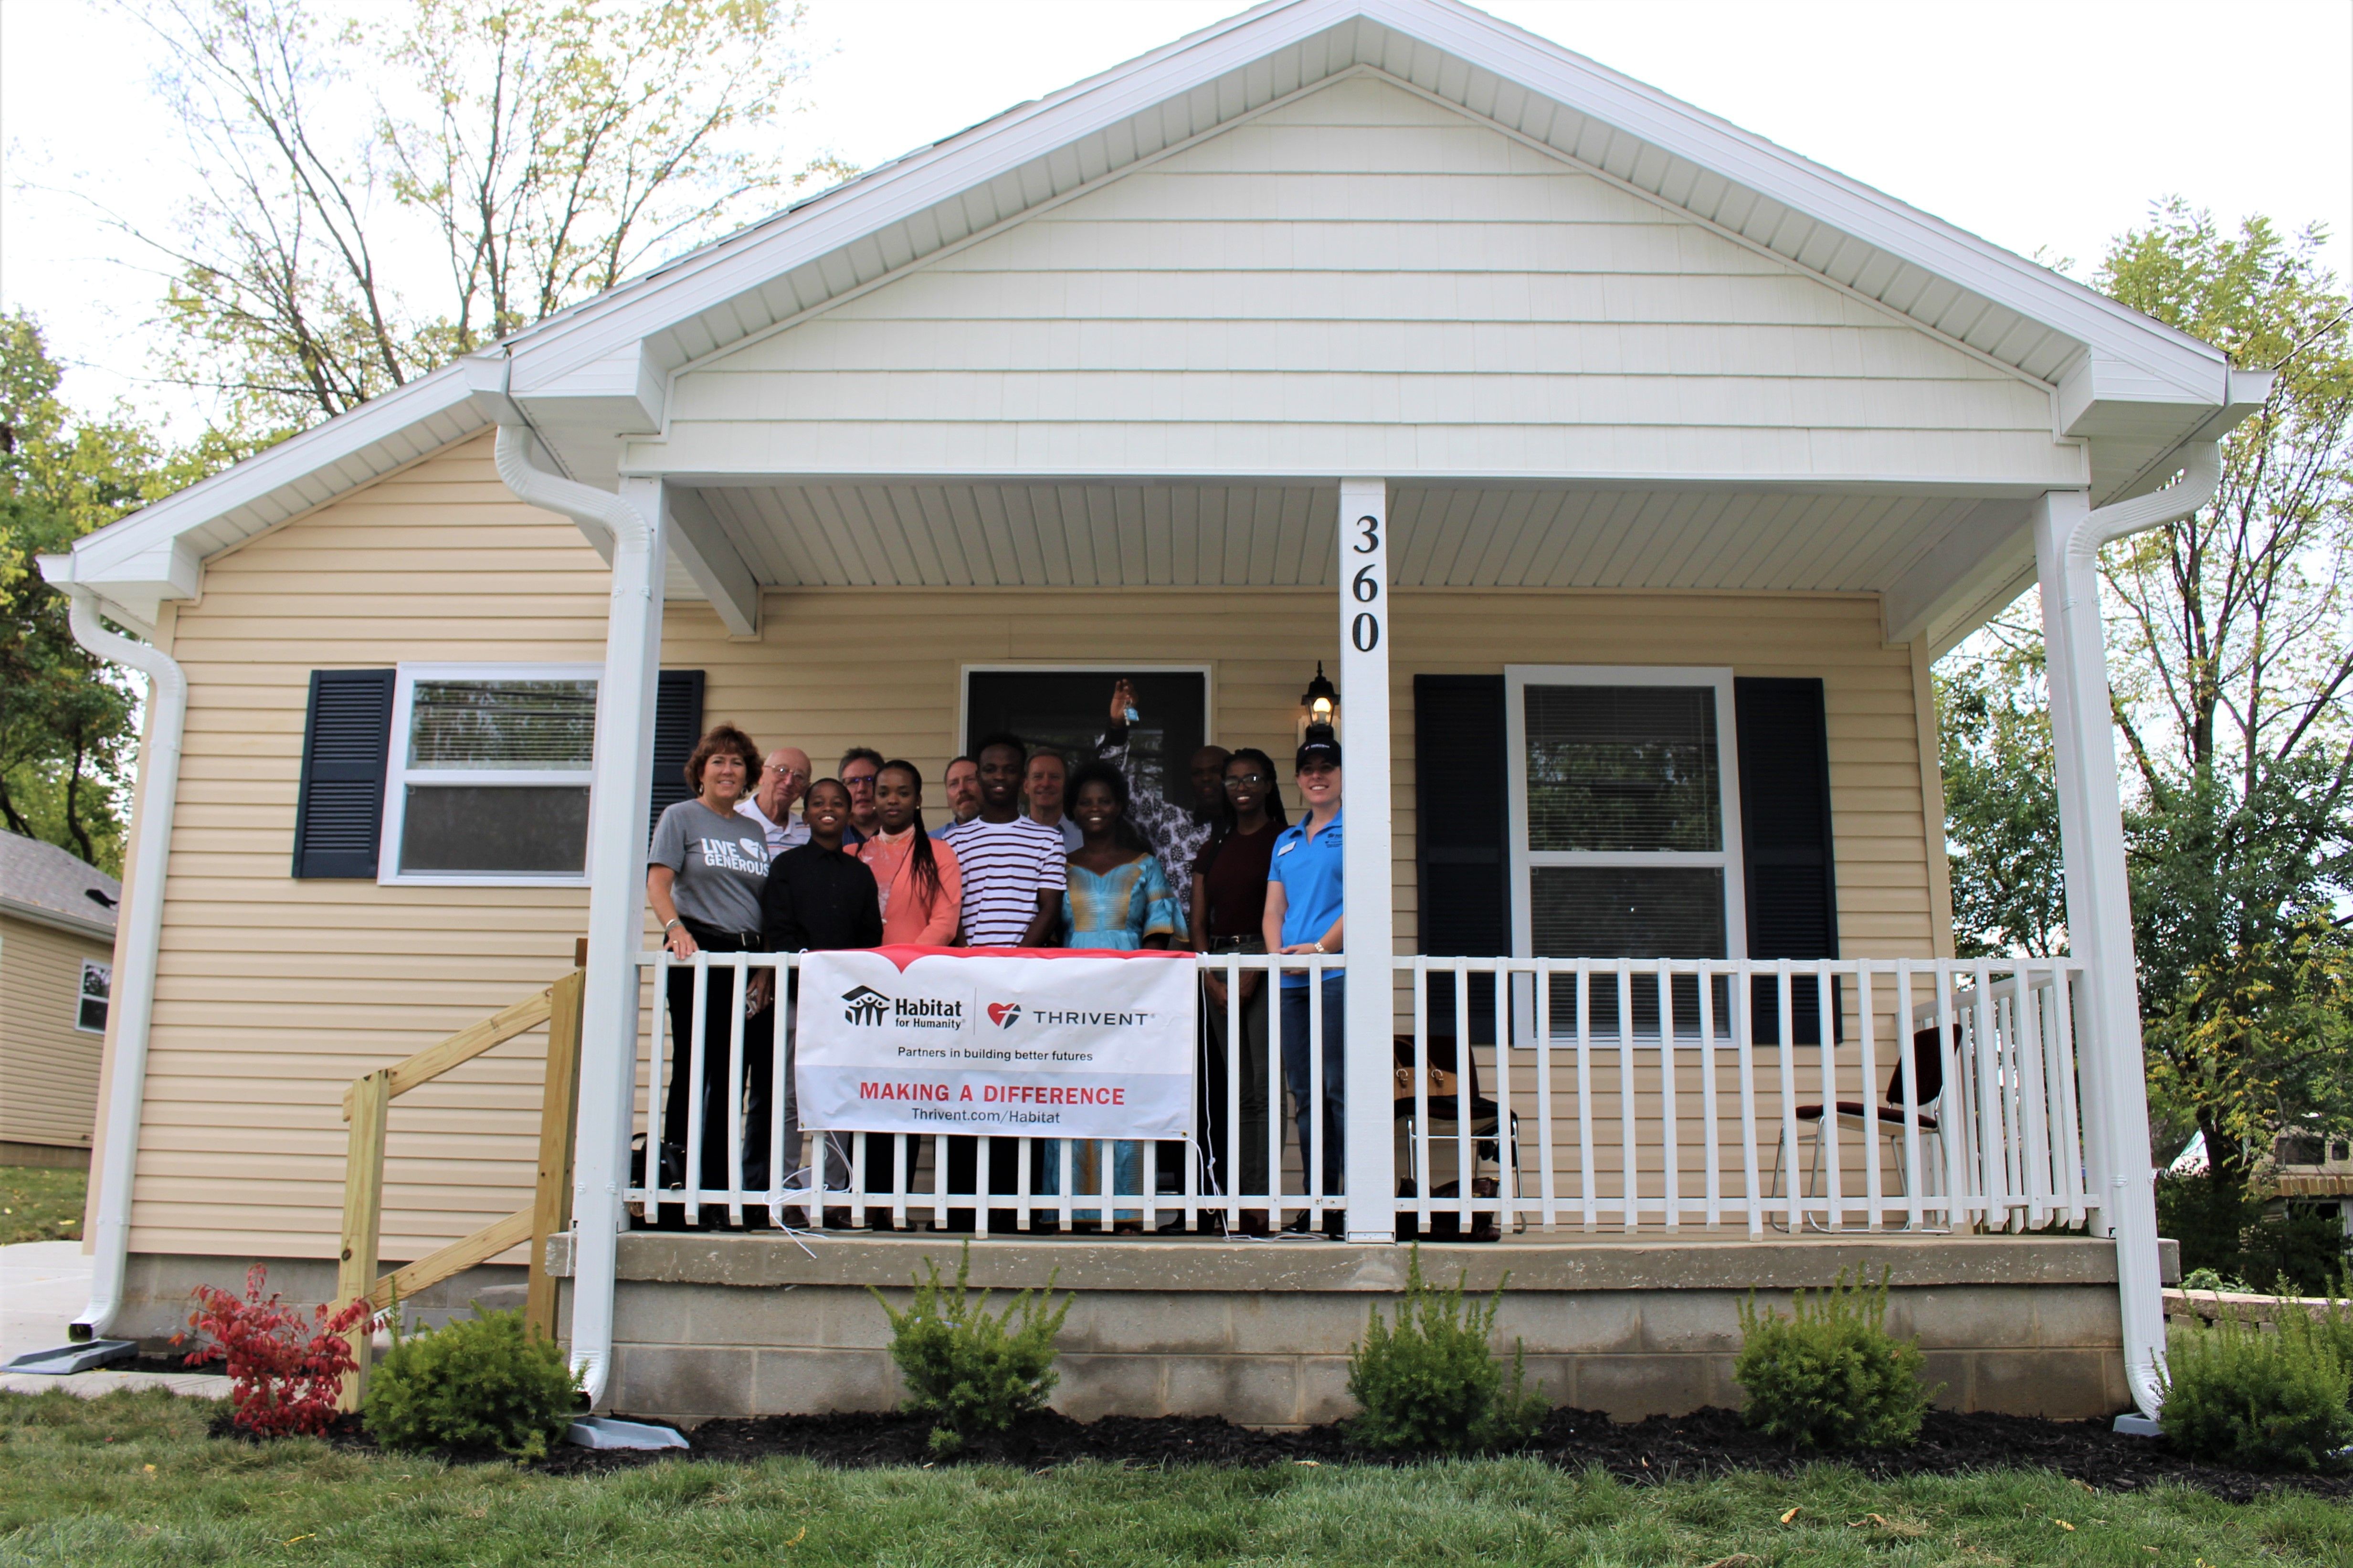 Habitat for Humanity of Greater Dayton and Thrivent Partner to help improve the lives of a local family